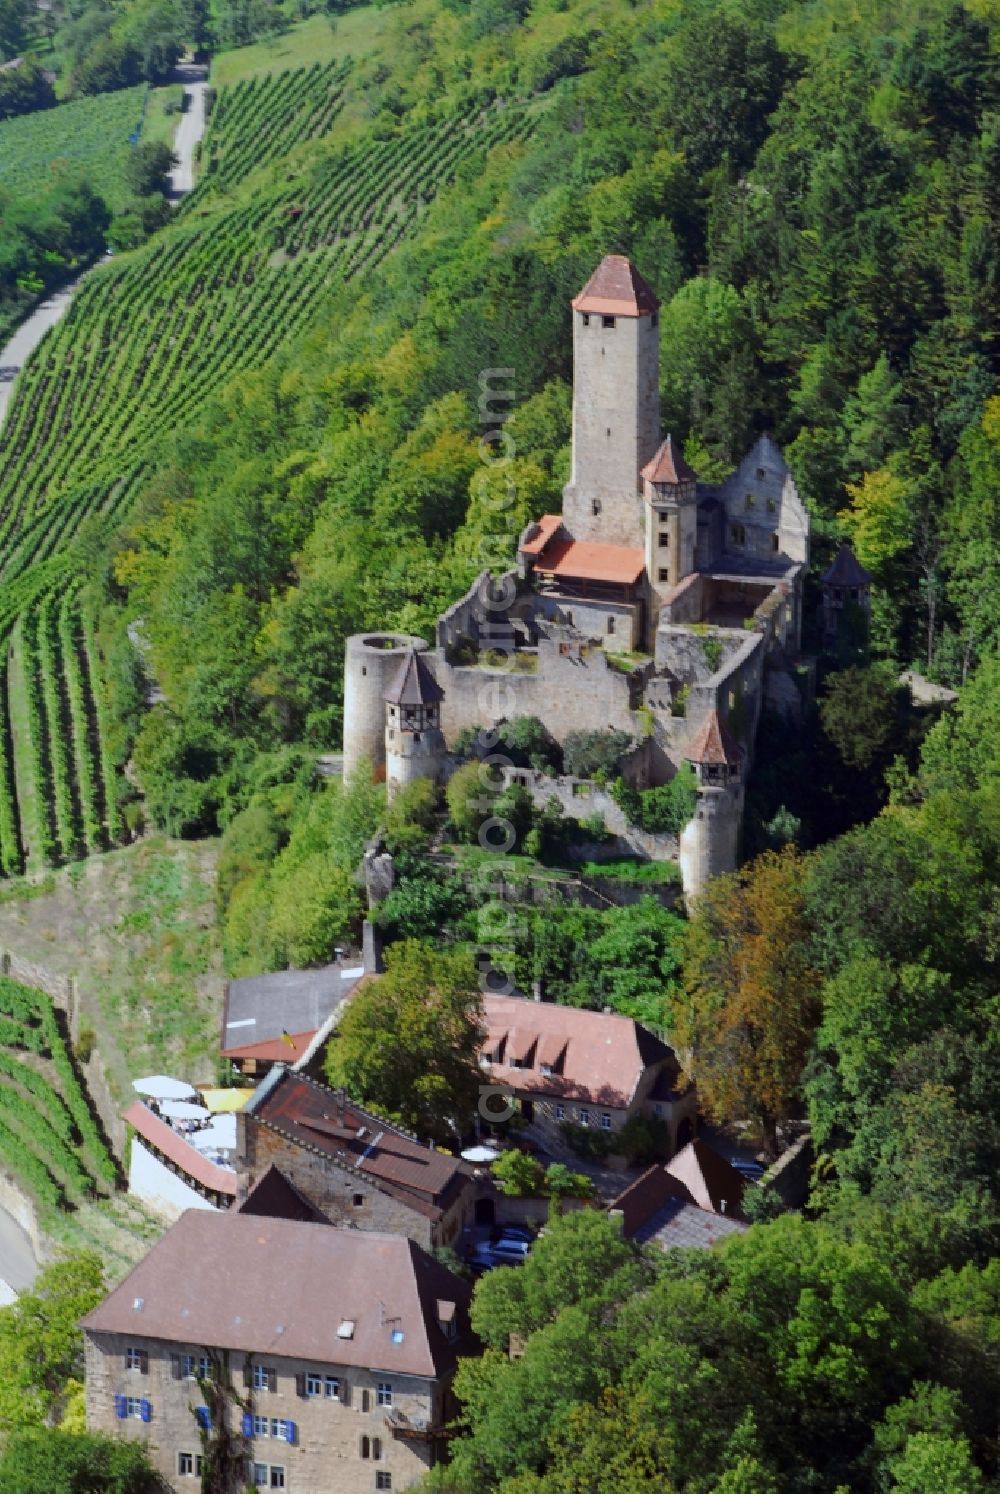 Aerial image Neckarzimmern - Ruins and vestiges of the former castle and fortress Burg Hornberg in Neckarzimmern in the state Baden-Wuerttemberg, Germany